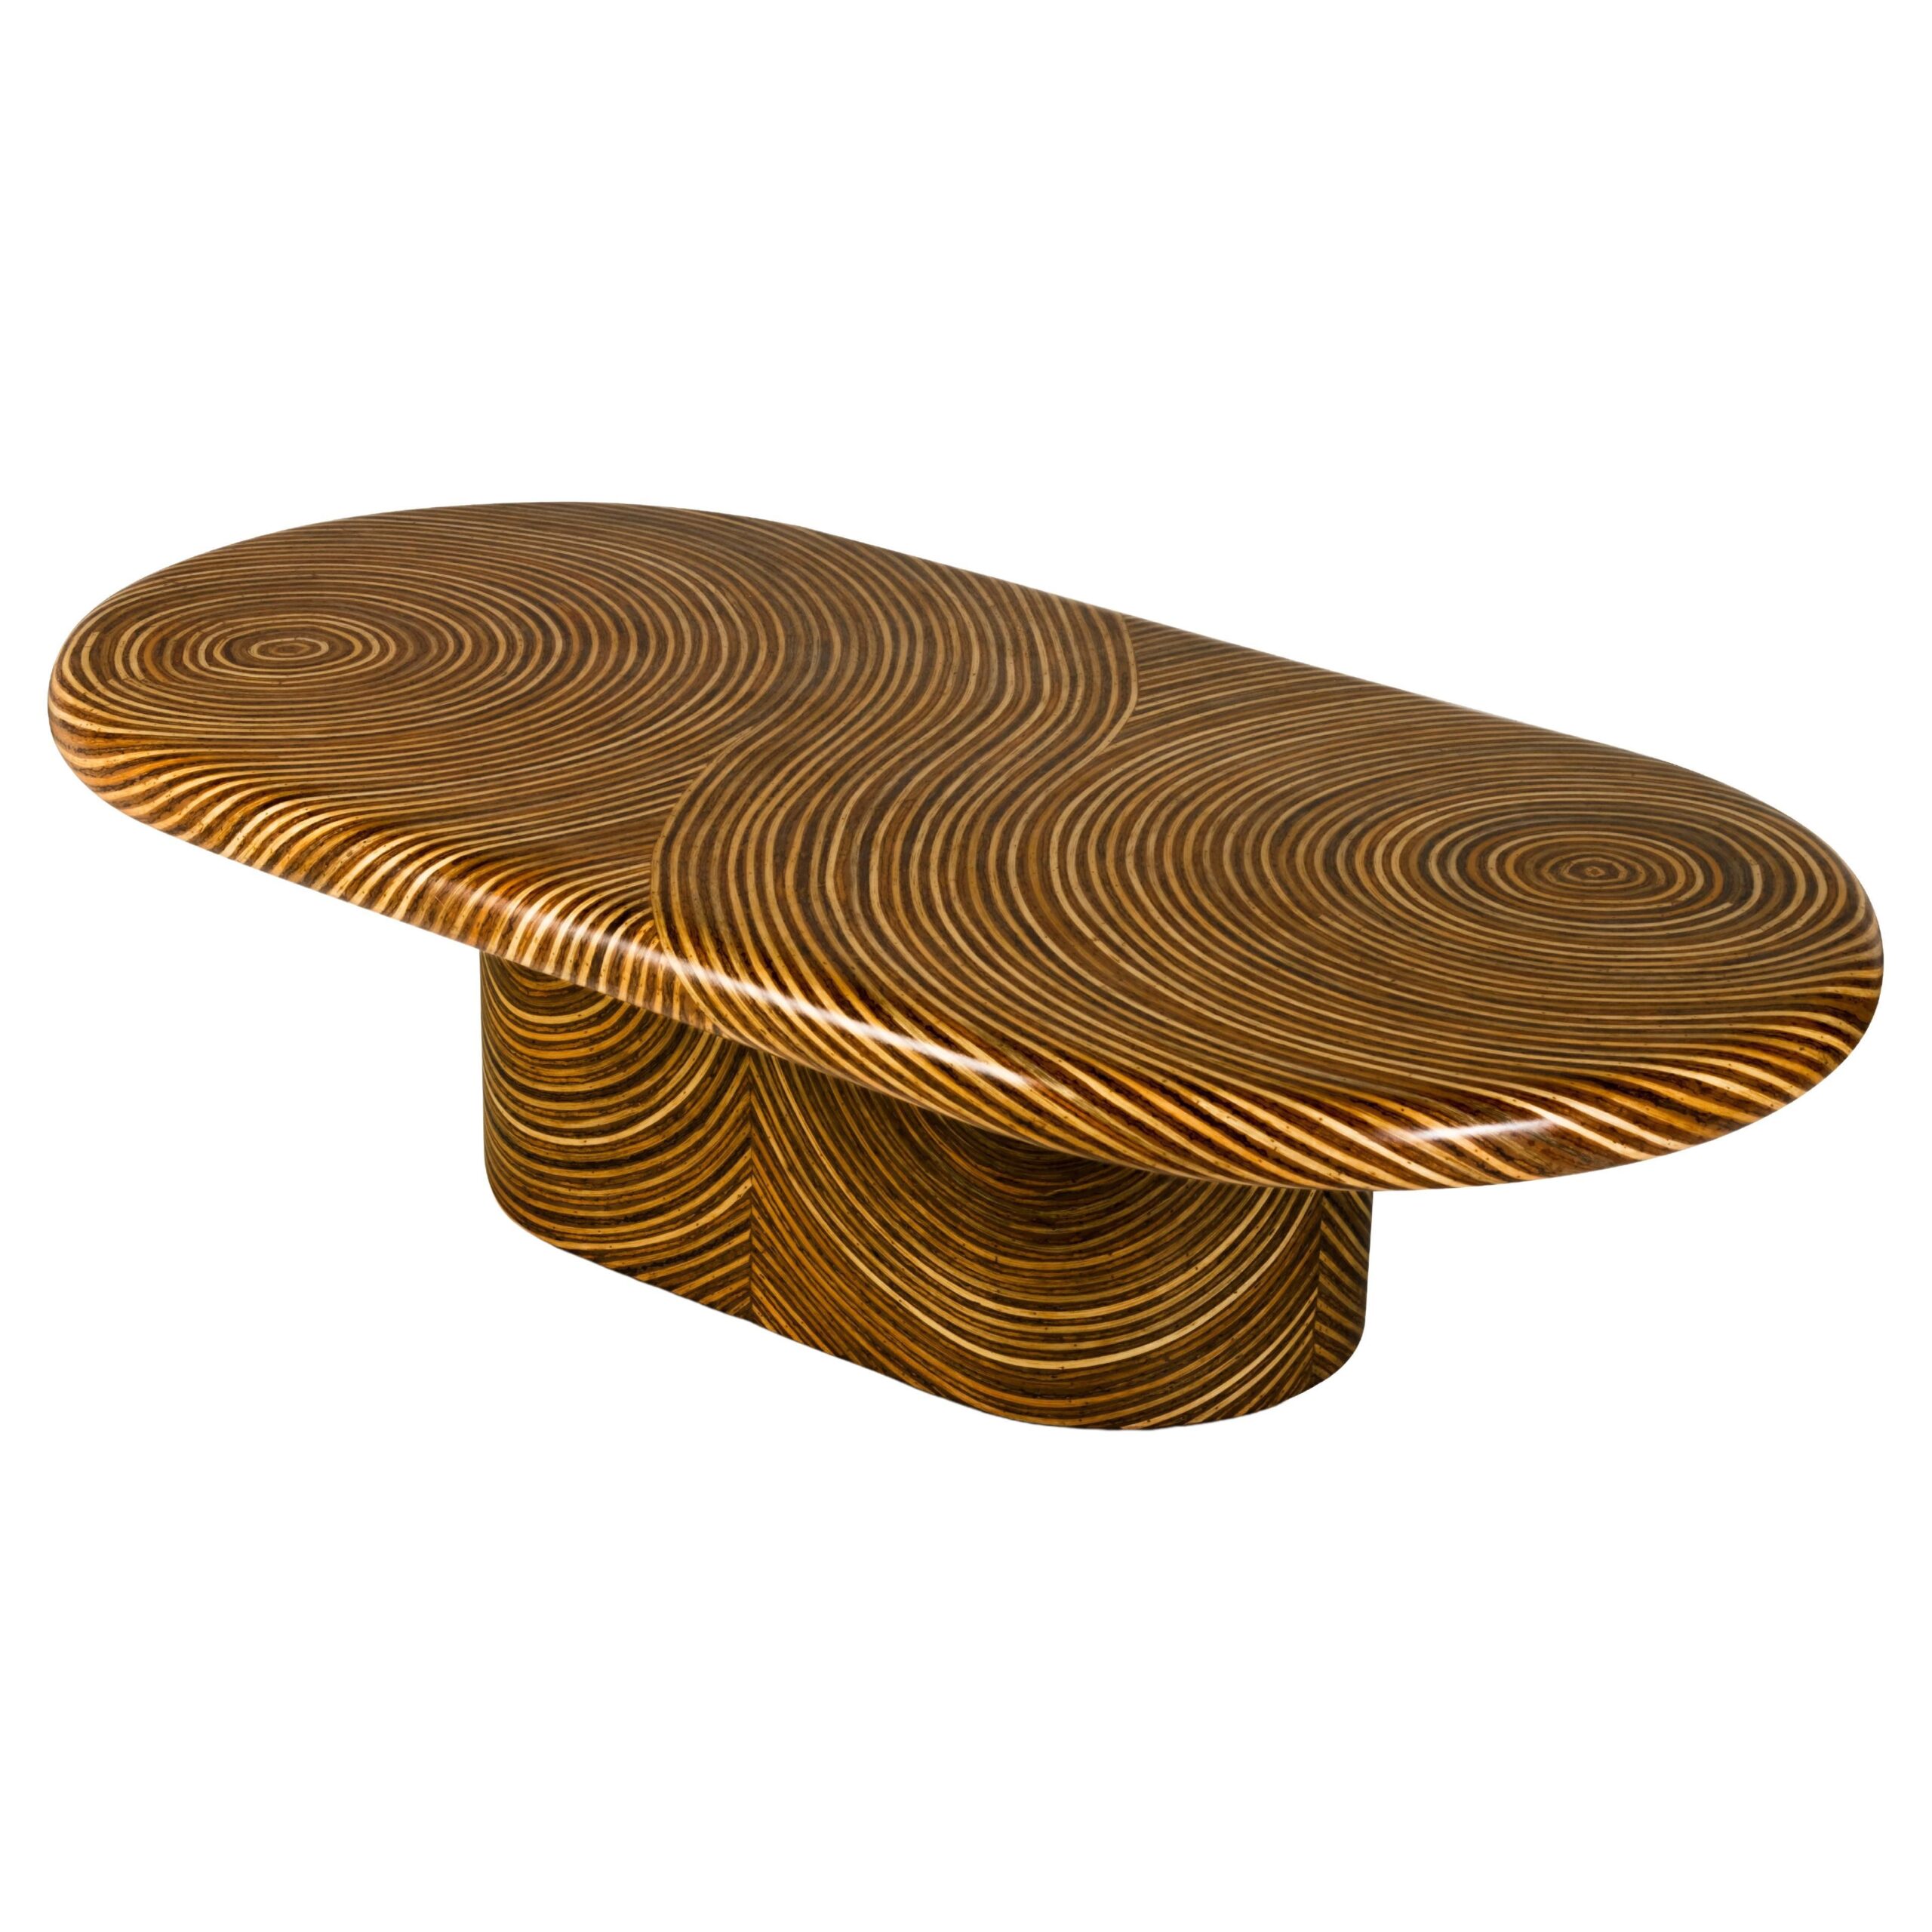 Discover the Timeless Elegance of Allure
Cocktail Tables